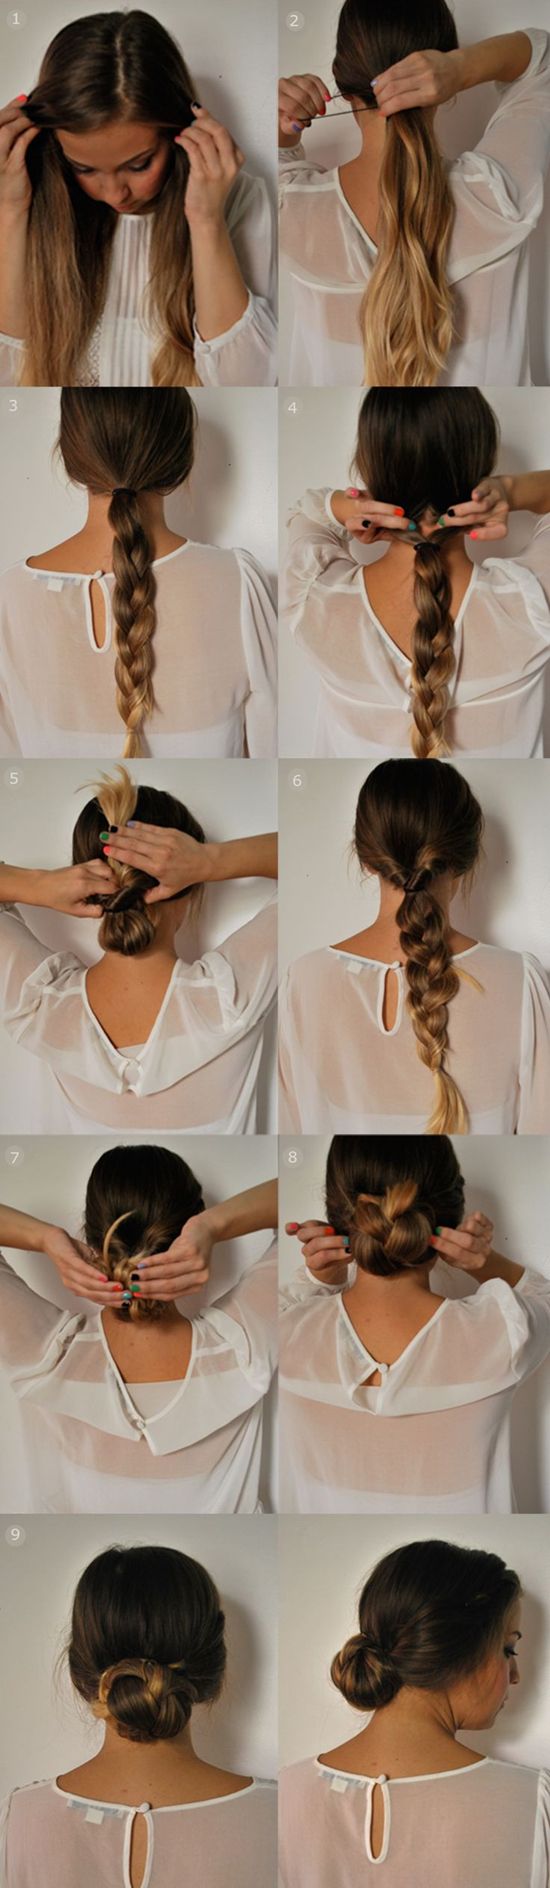 Quick Hairstyle Tutorials That You Can Do In Less Than 5 Minutes